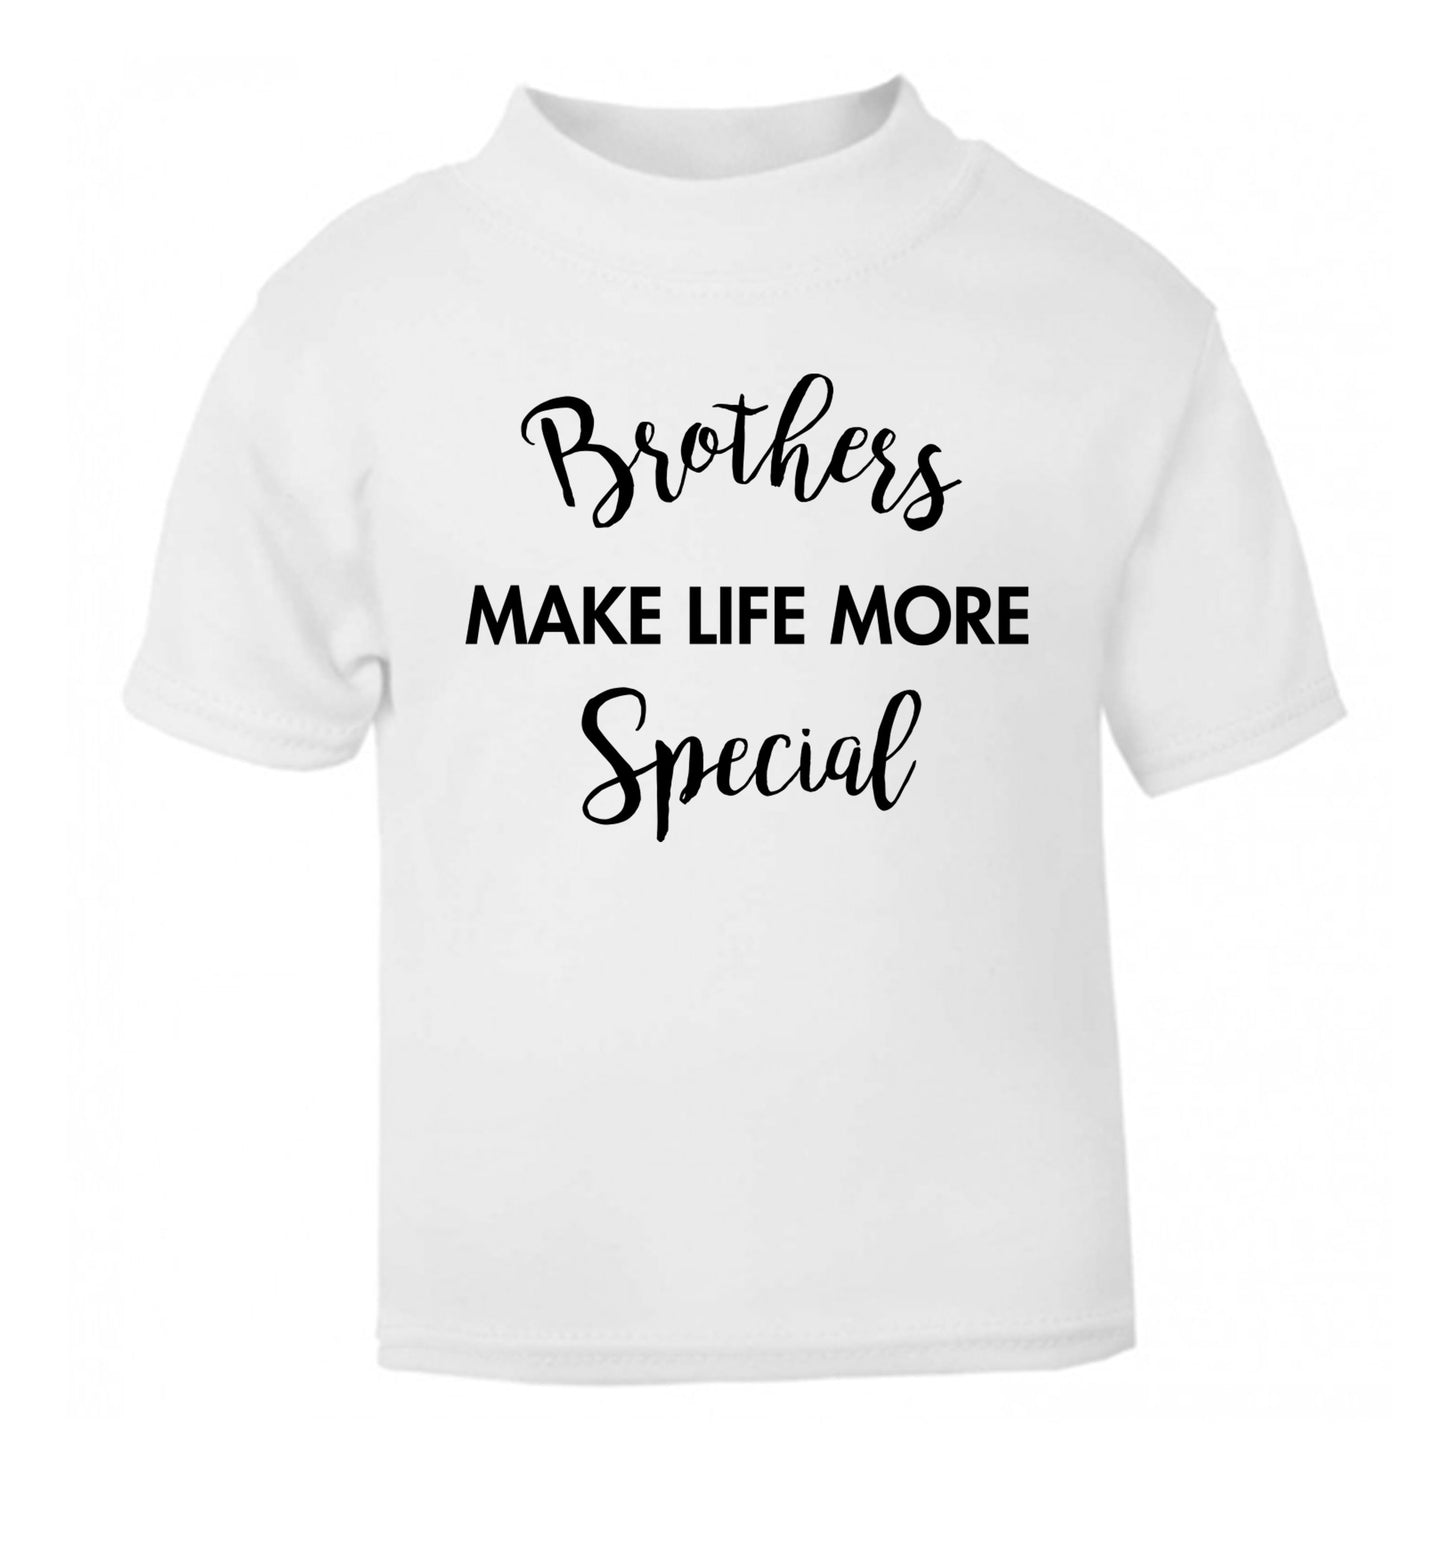 Brothers make life more special white Baby Toddler Tshirt 2 Years